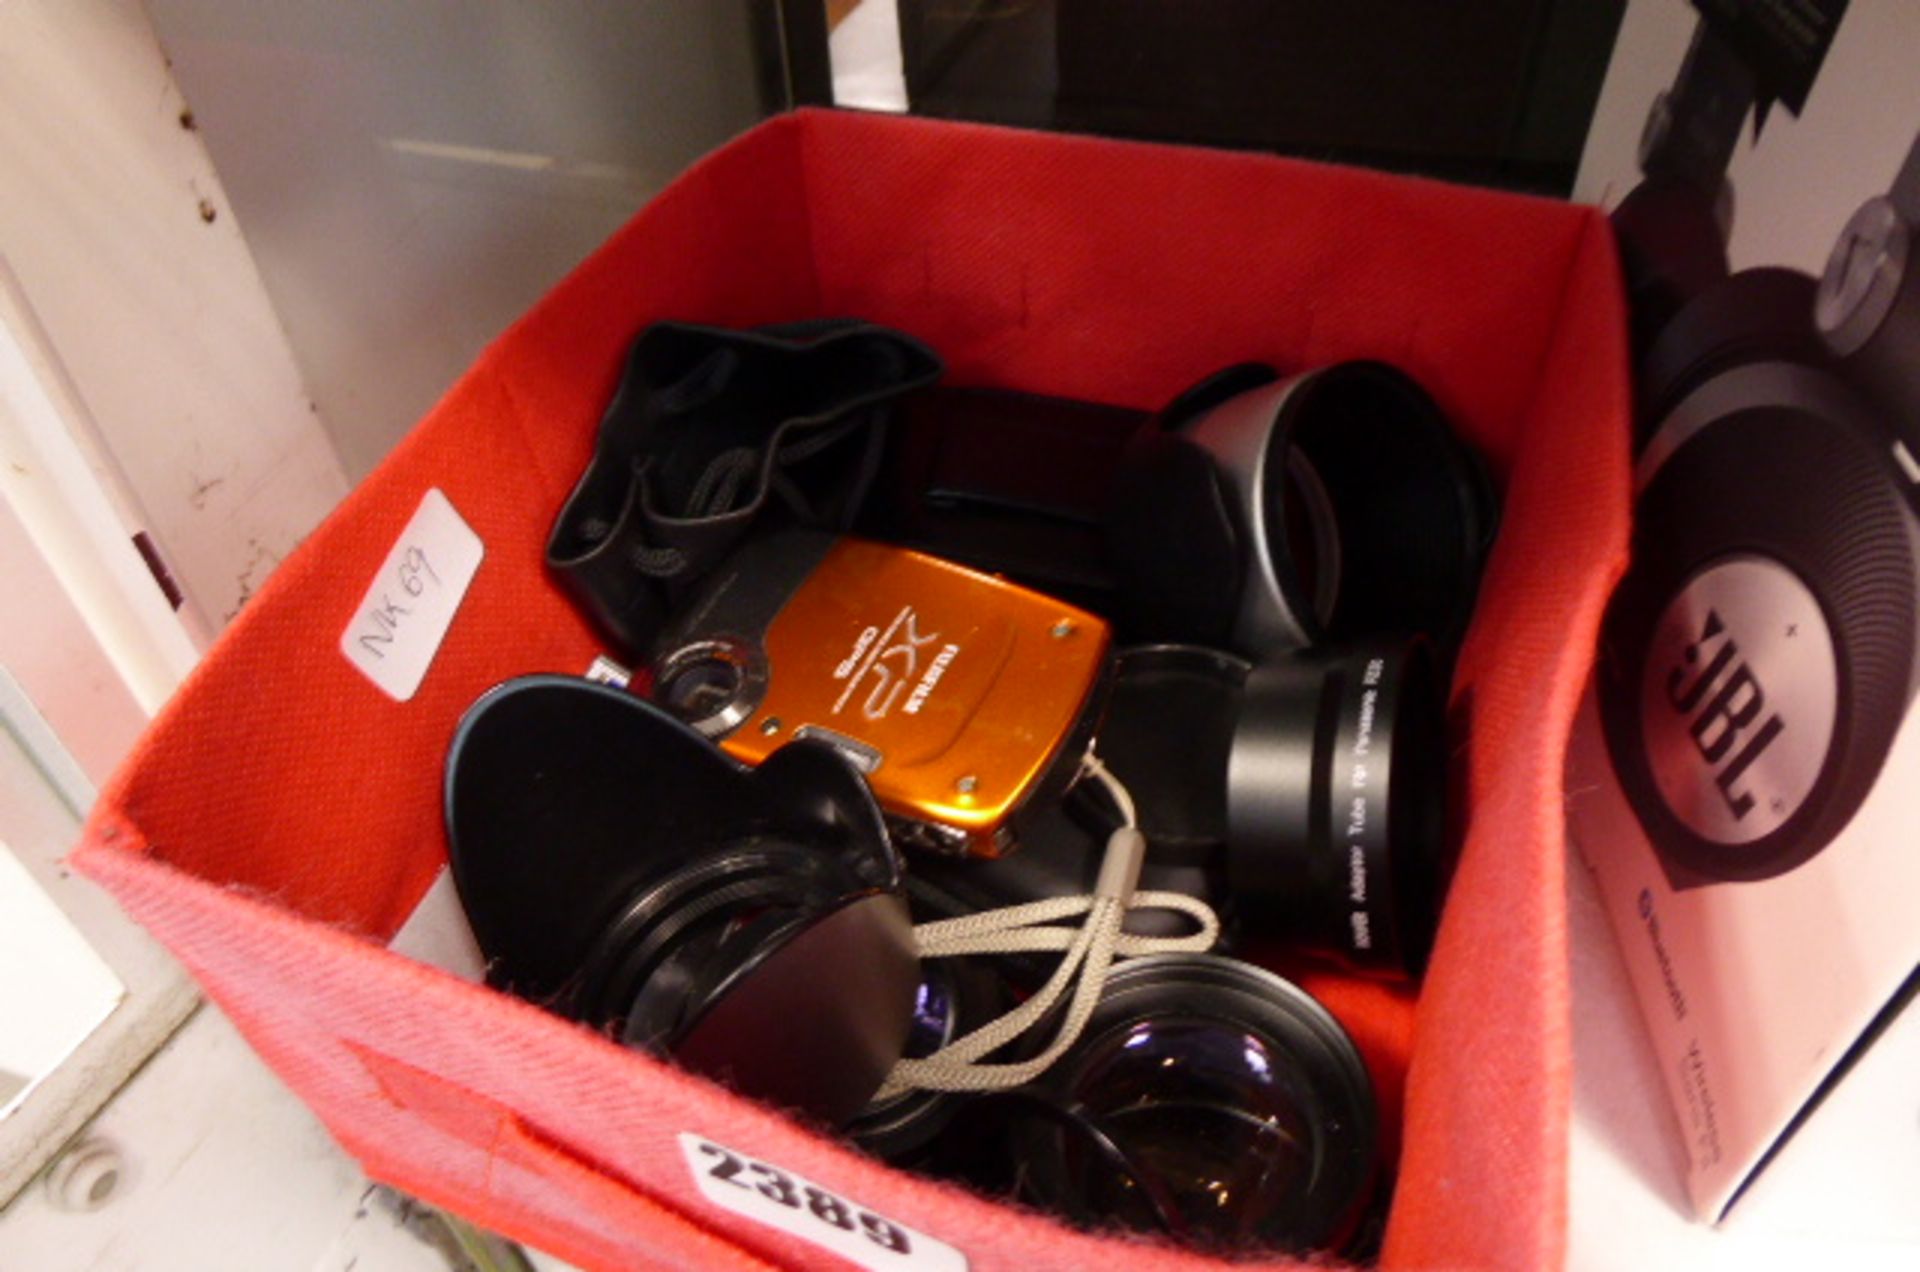 Red tray containing loose camera lenses and digital cameras